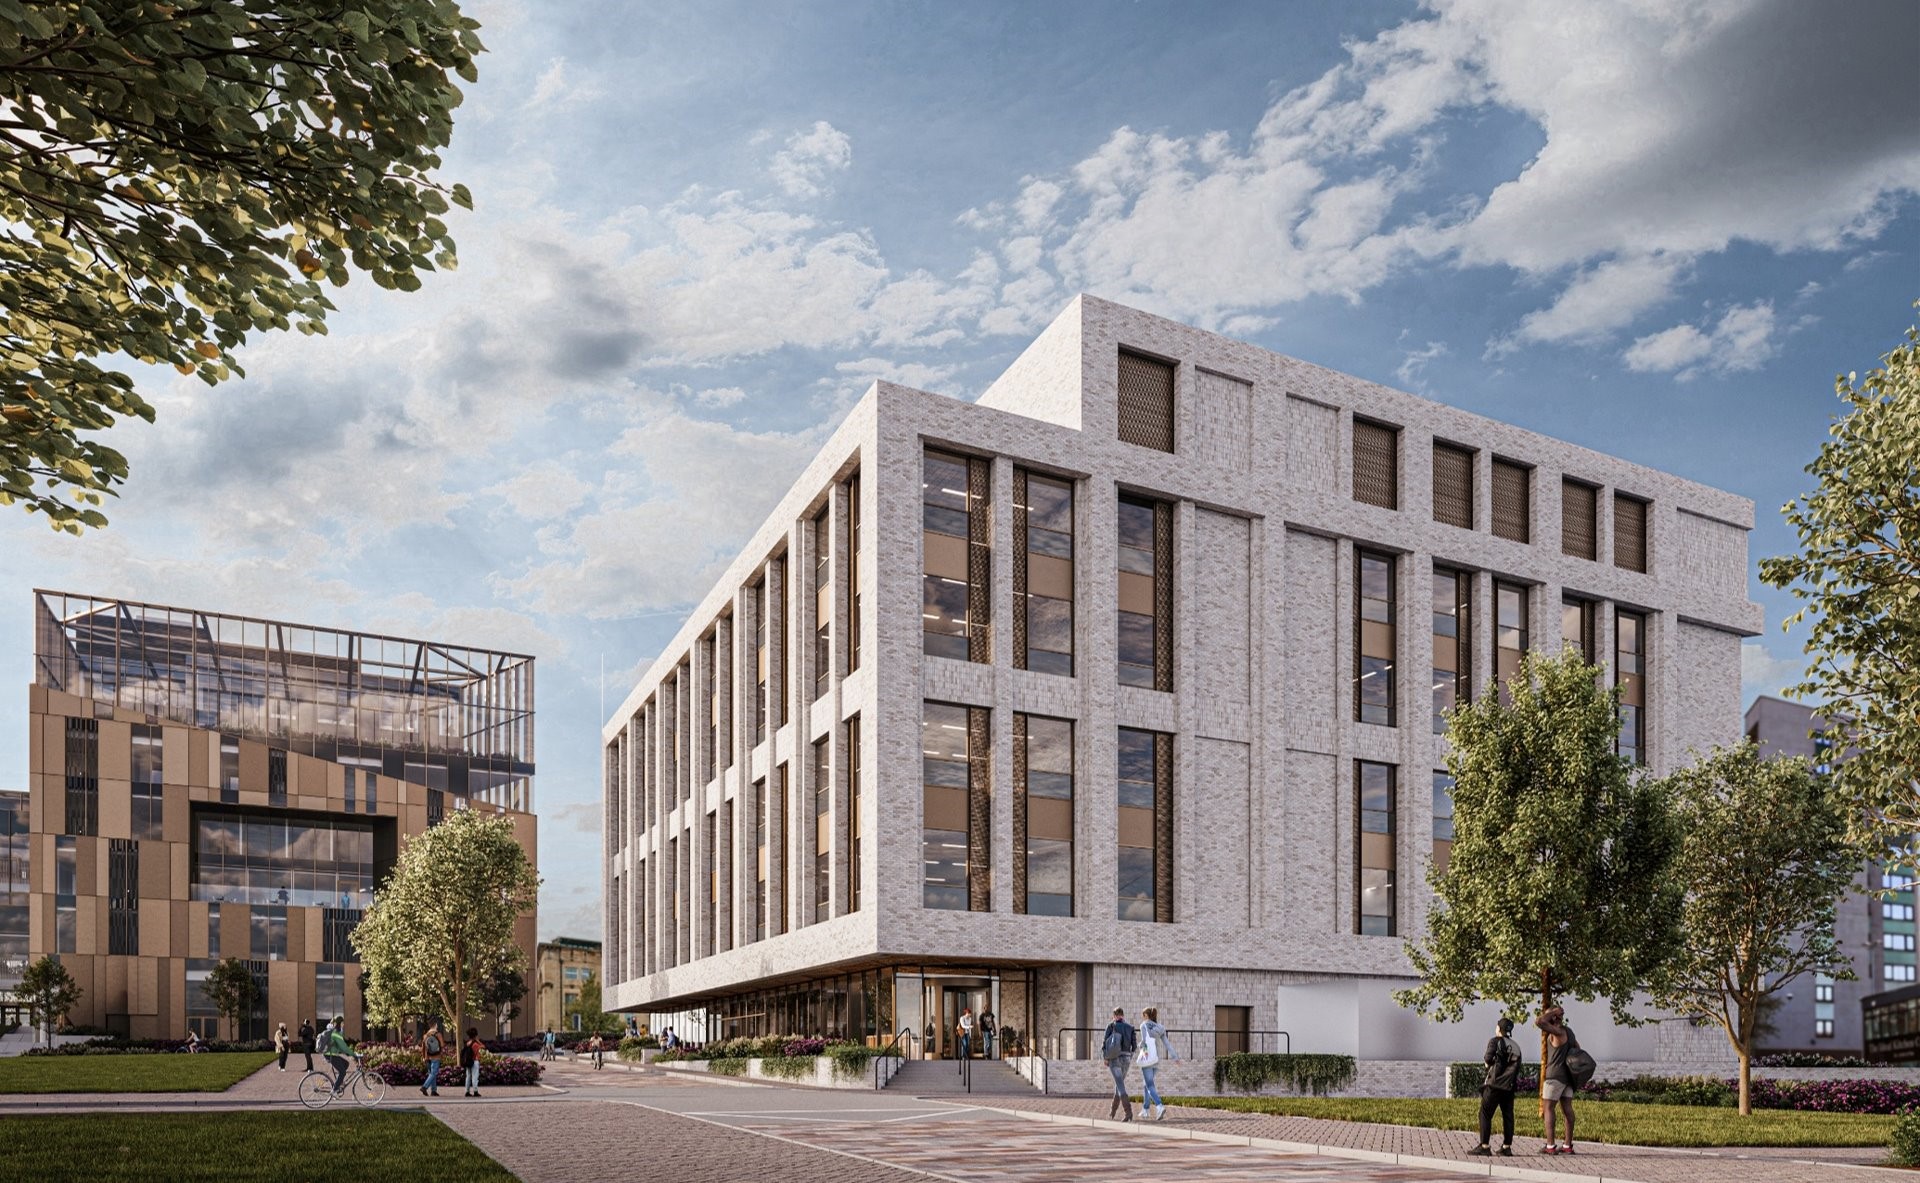 Artists' impression of the National Health Innovation Campus at The University of Huddersfield